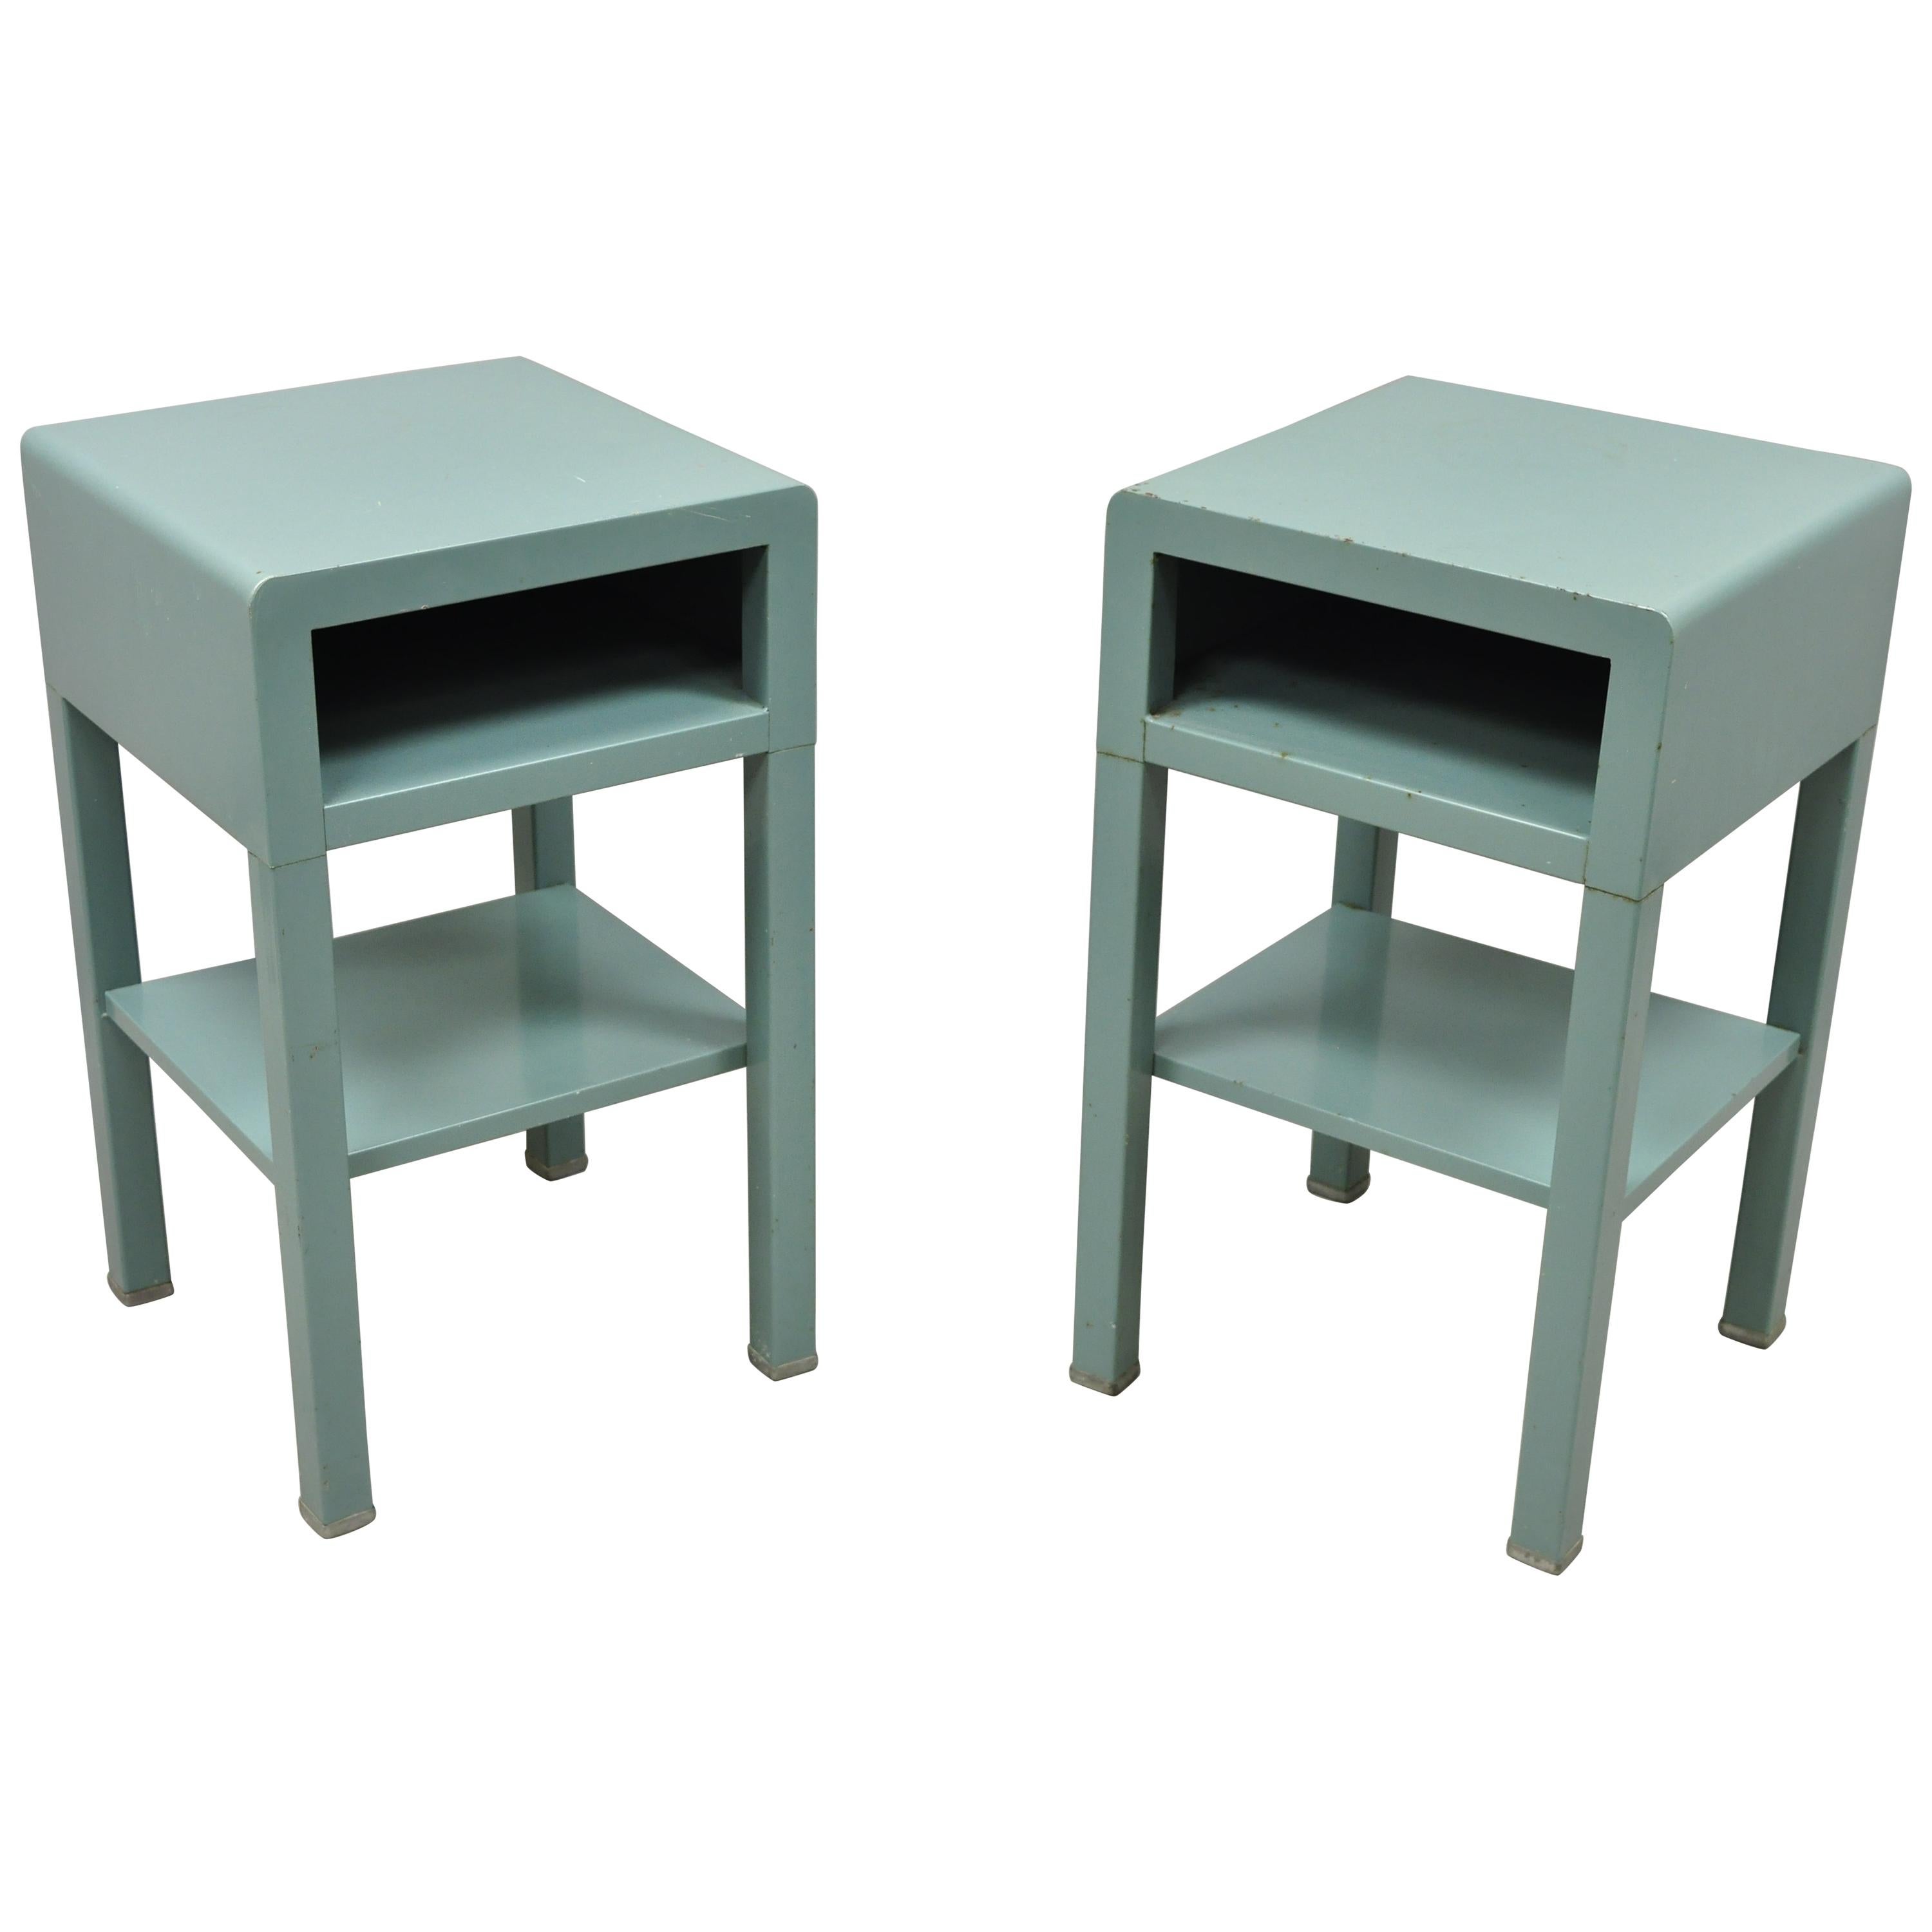 Bel Geddes for Simmons Vtg Industrial Modern Art Deco Nightstand Tables, a Pair